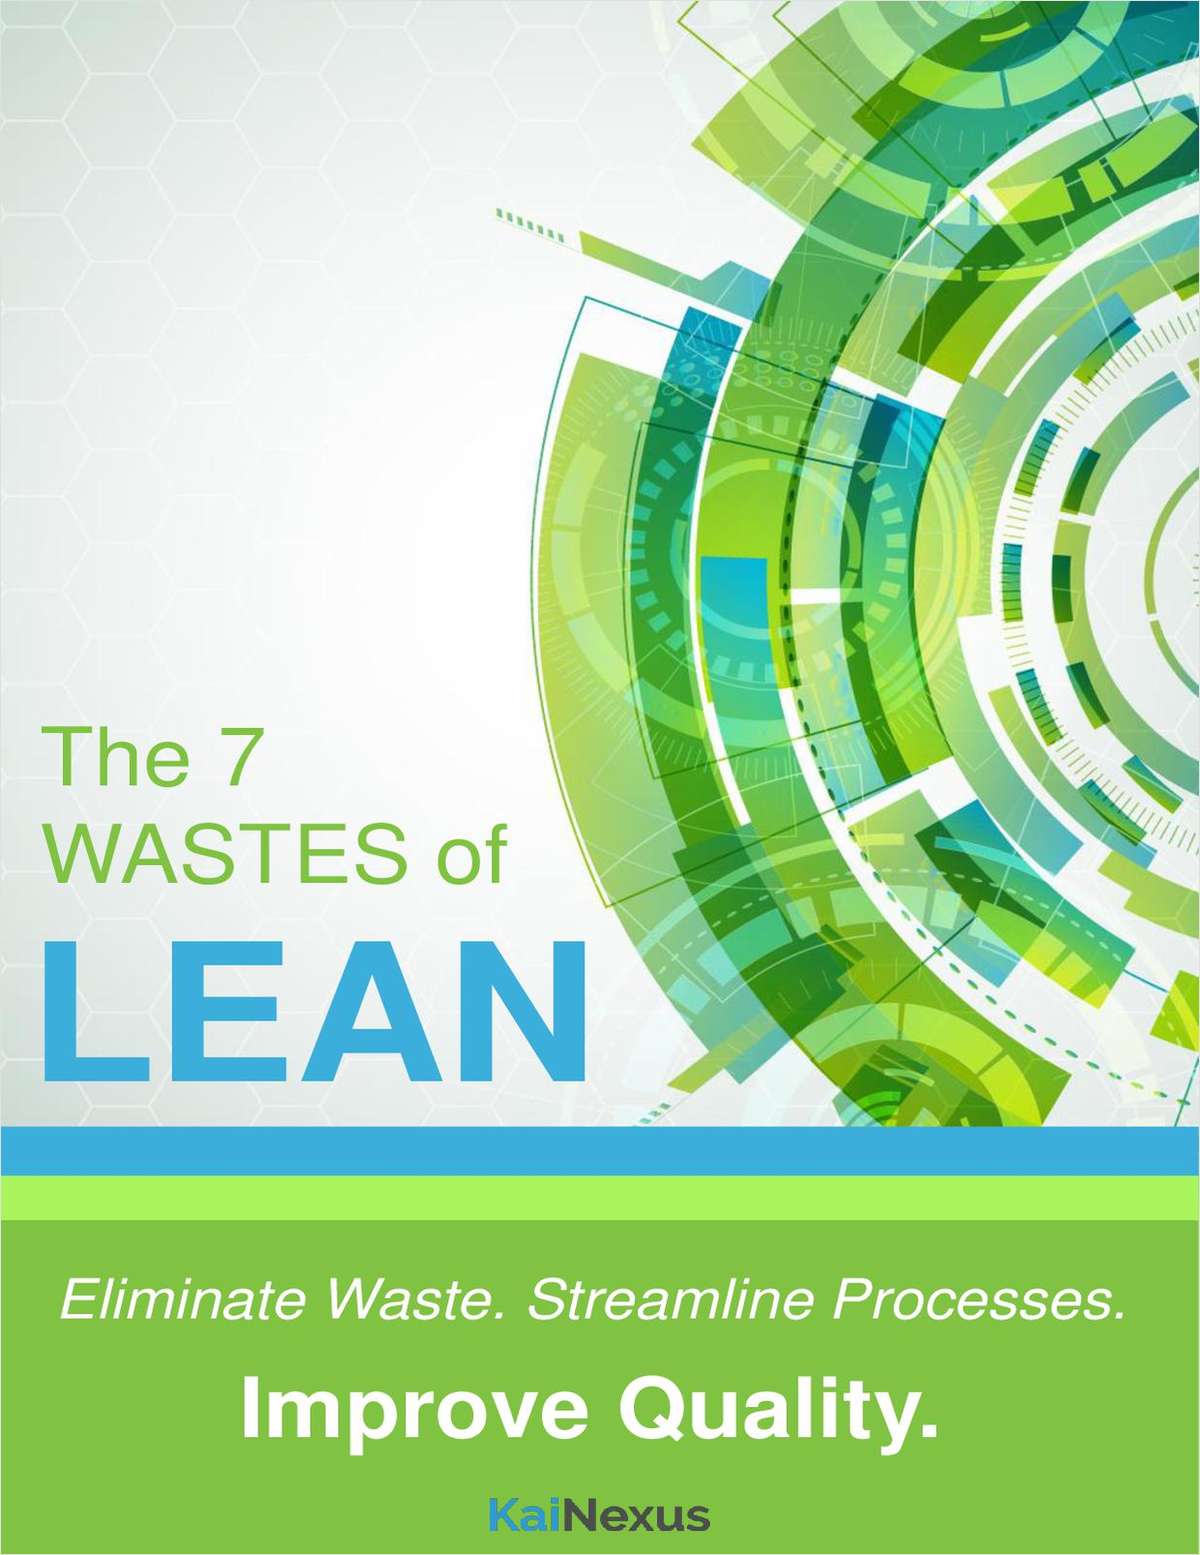 The 7 Wastes of Lean